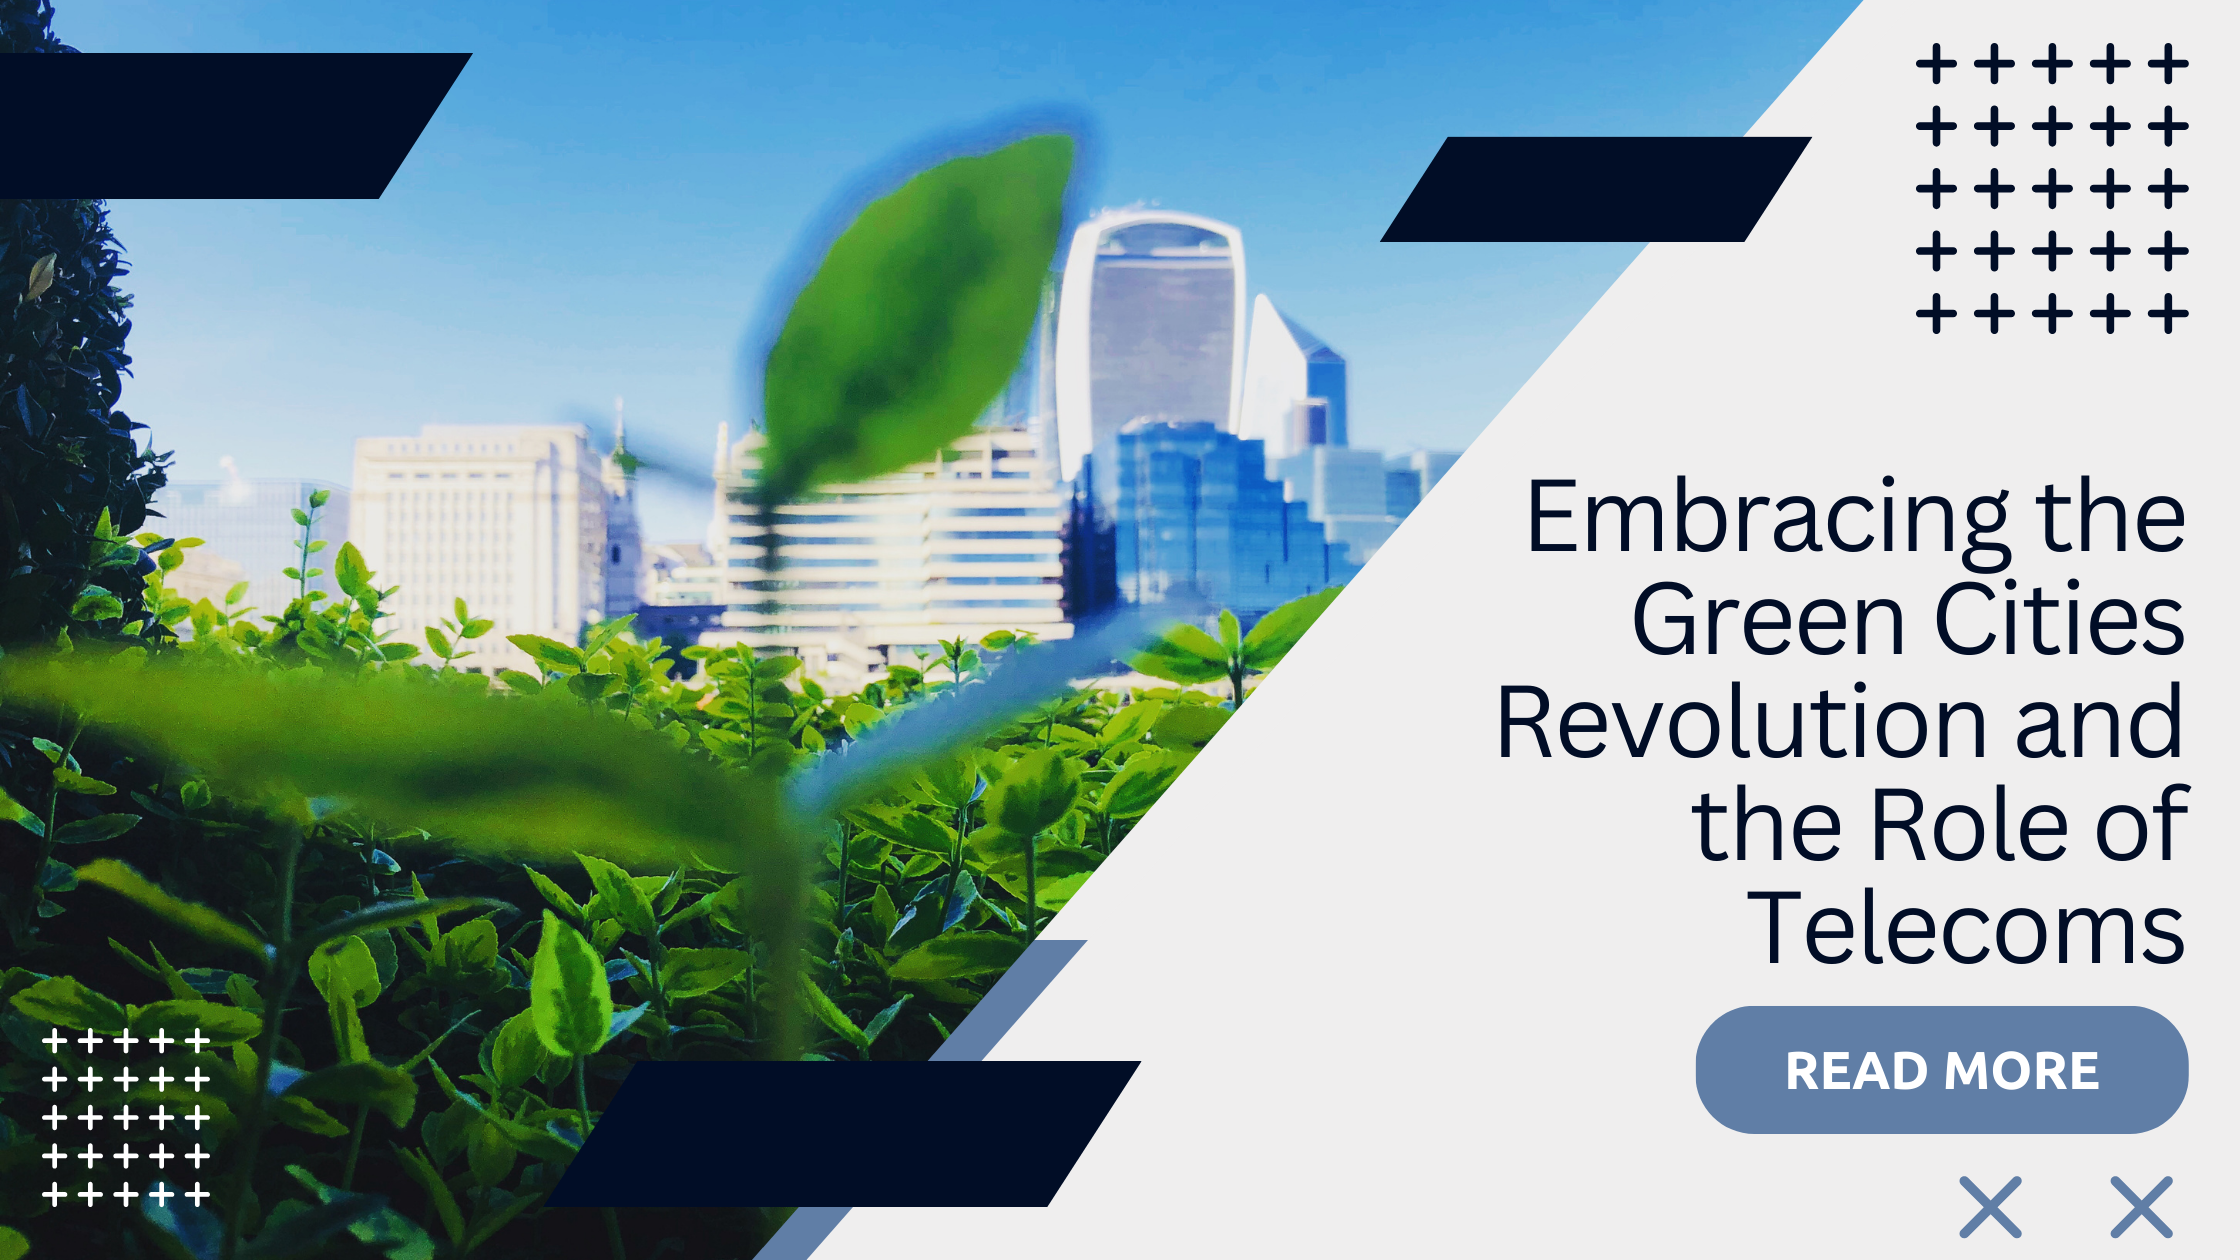 Embracing the Green Cities Revolution and the Role of Telecoms